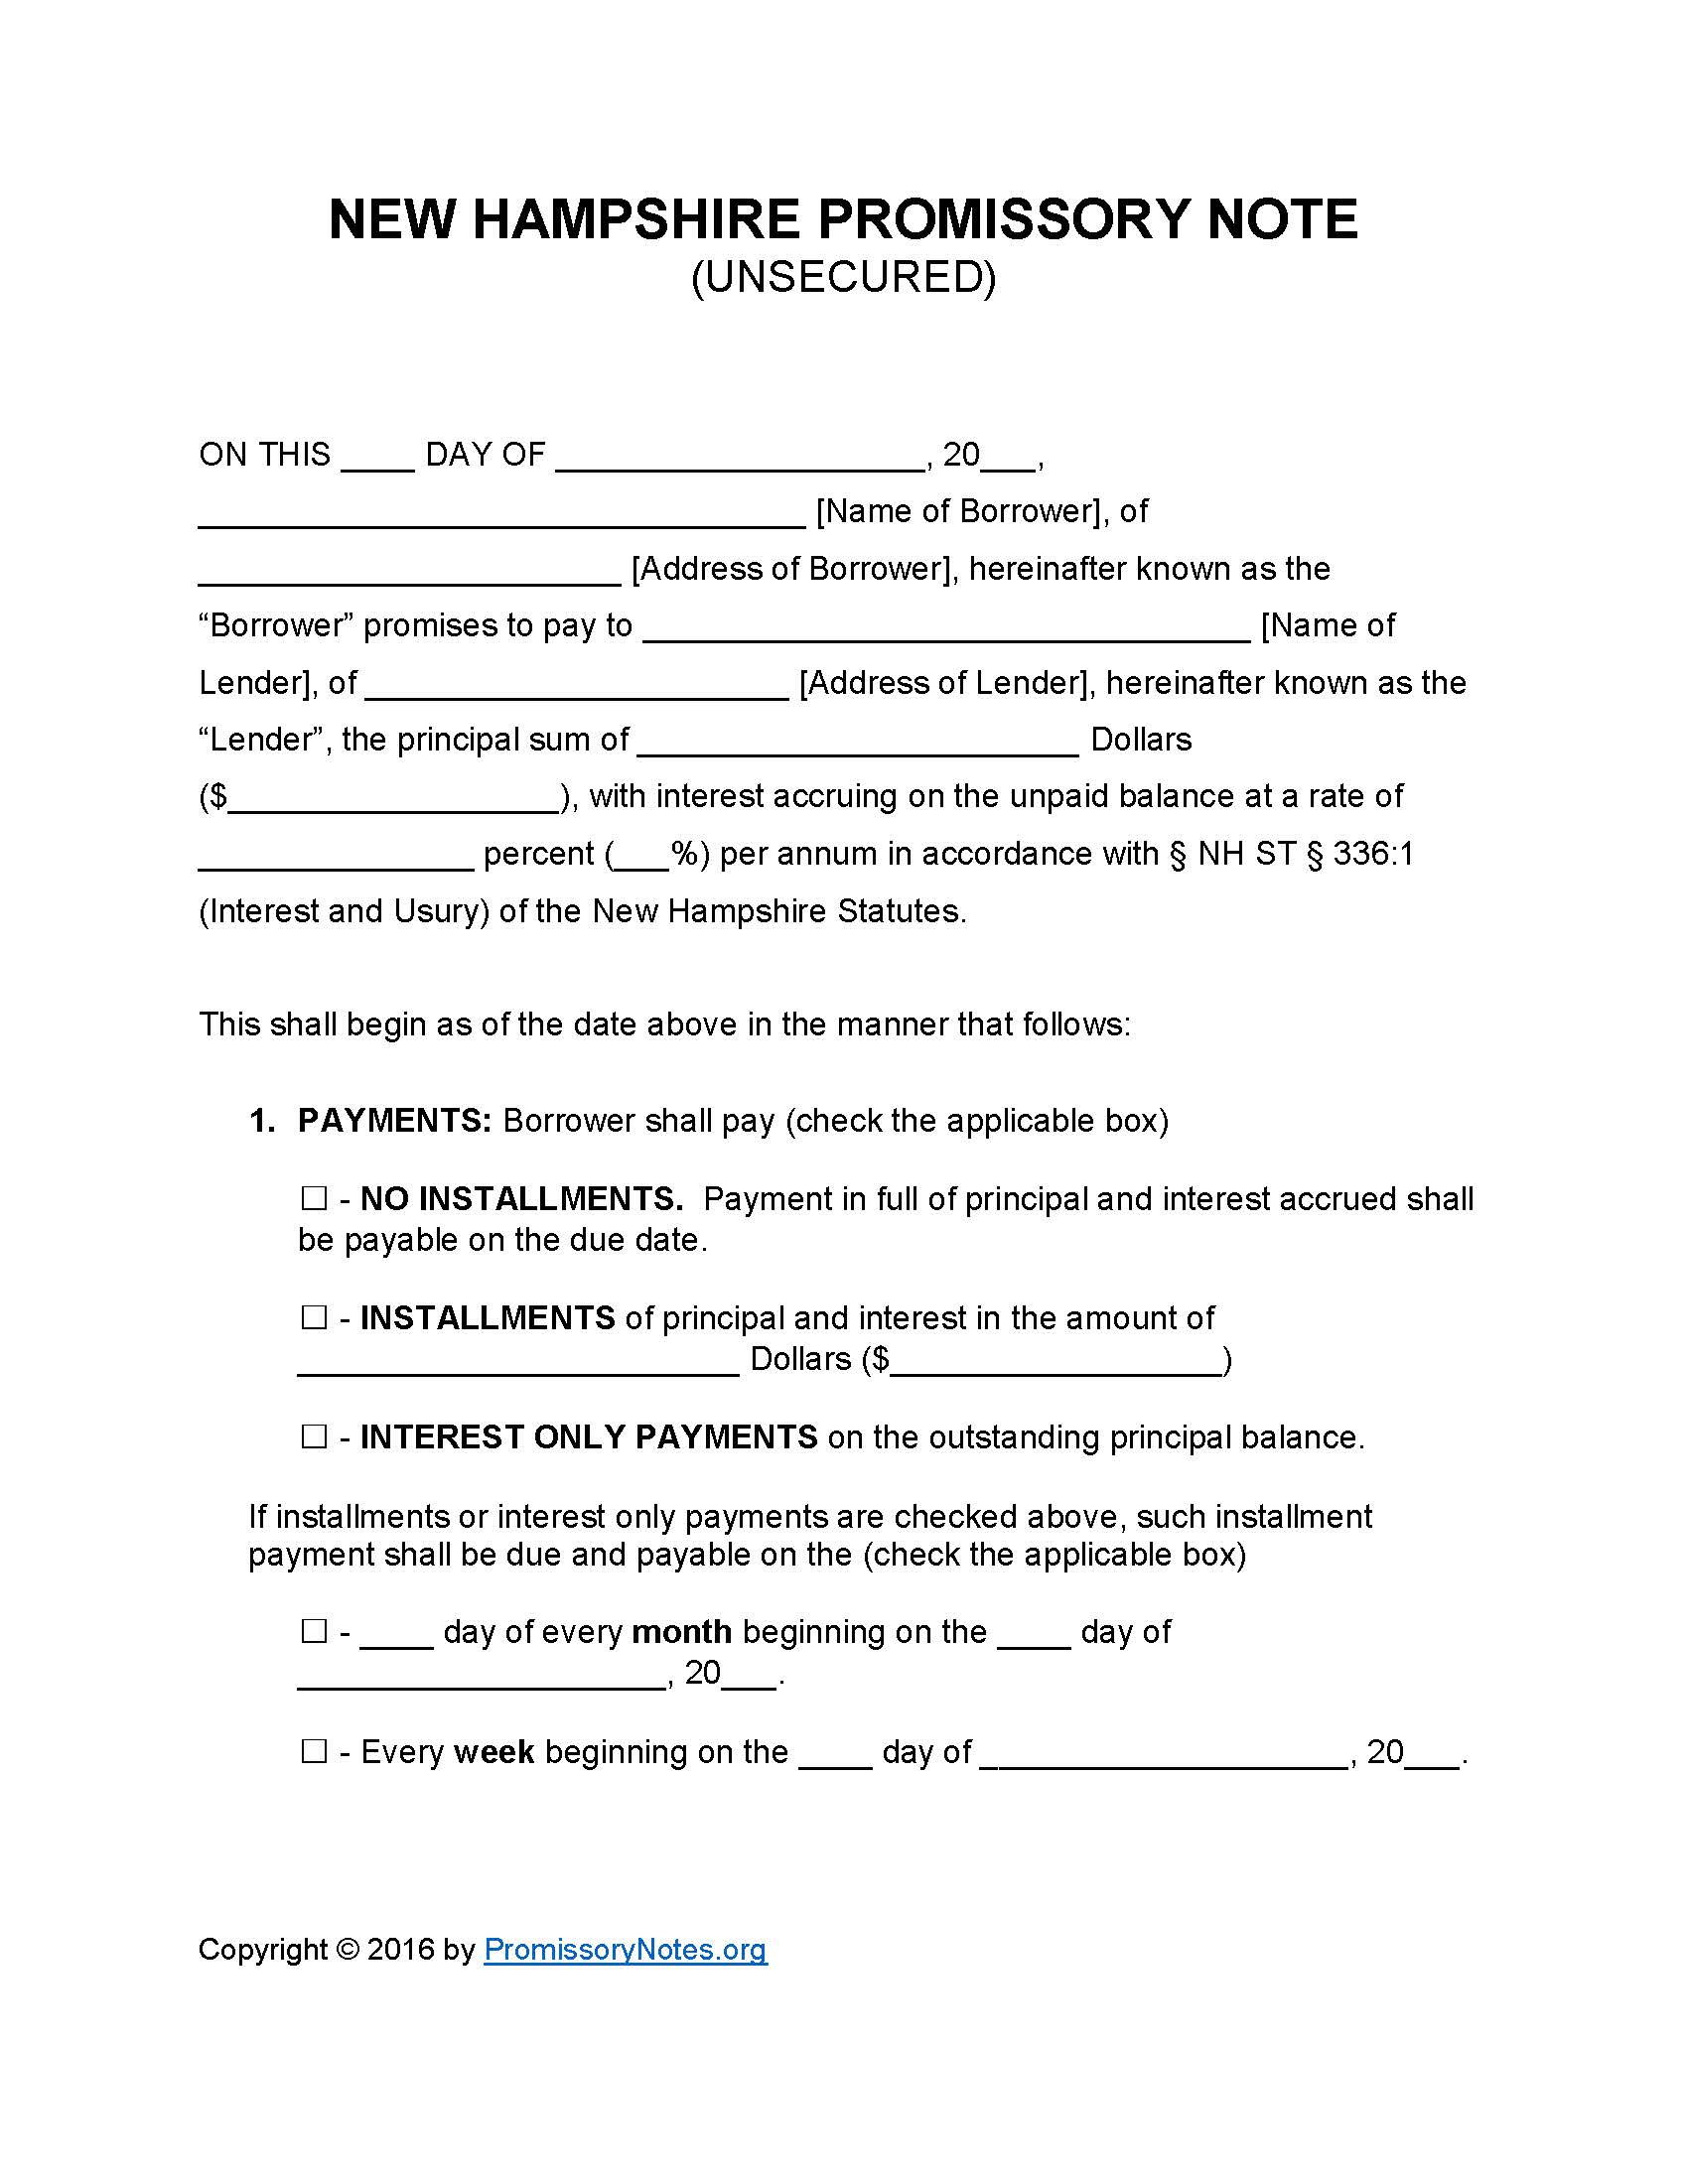 new-hampshire-unsecured-promissory-note-form